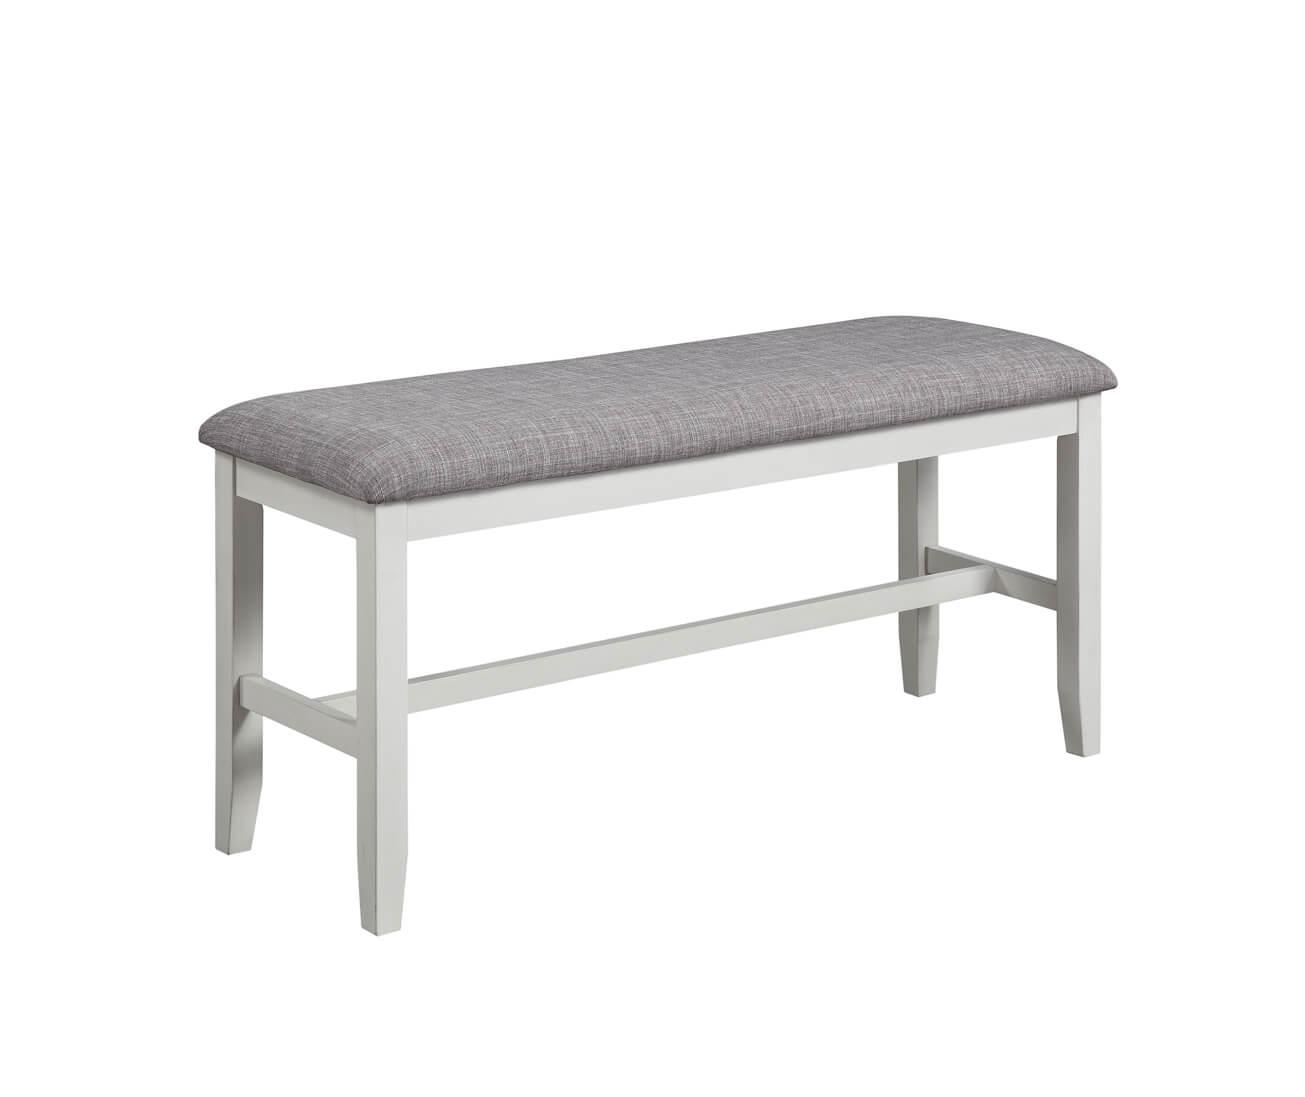 Traditional, Cottage Counter Height Bench Buford 2773CG-BENCH in White, Gray Linen